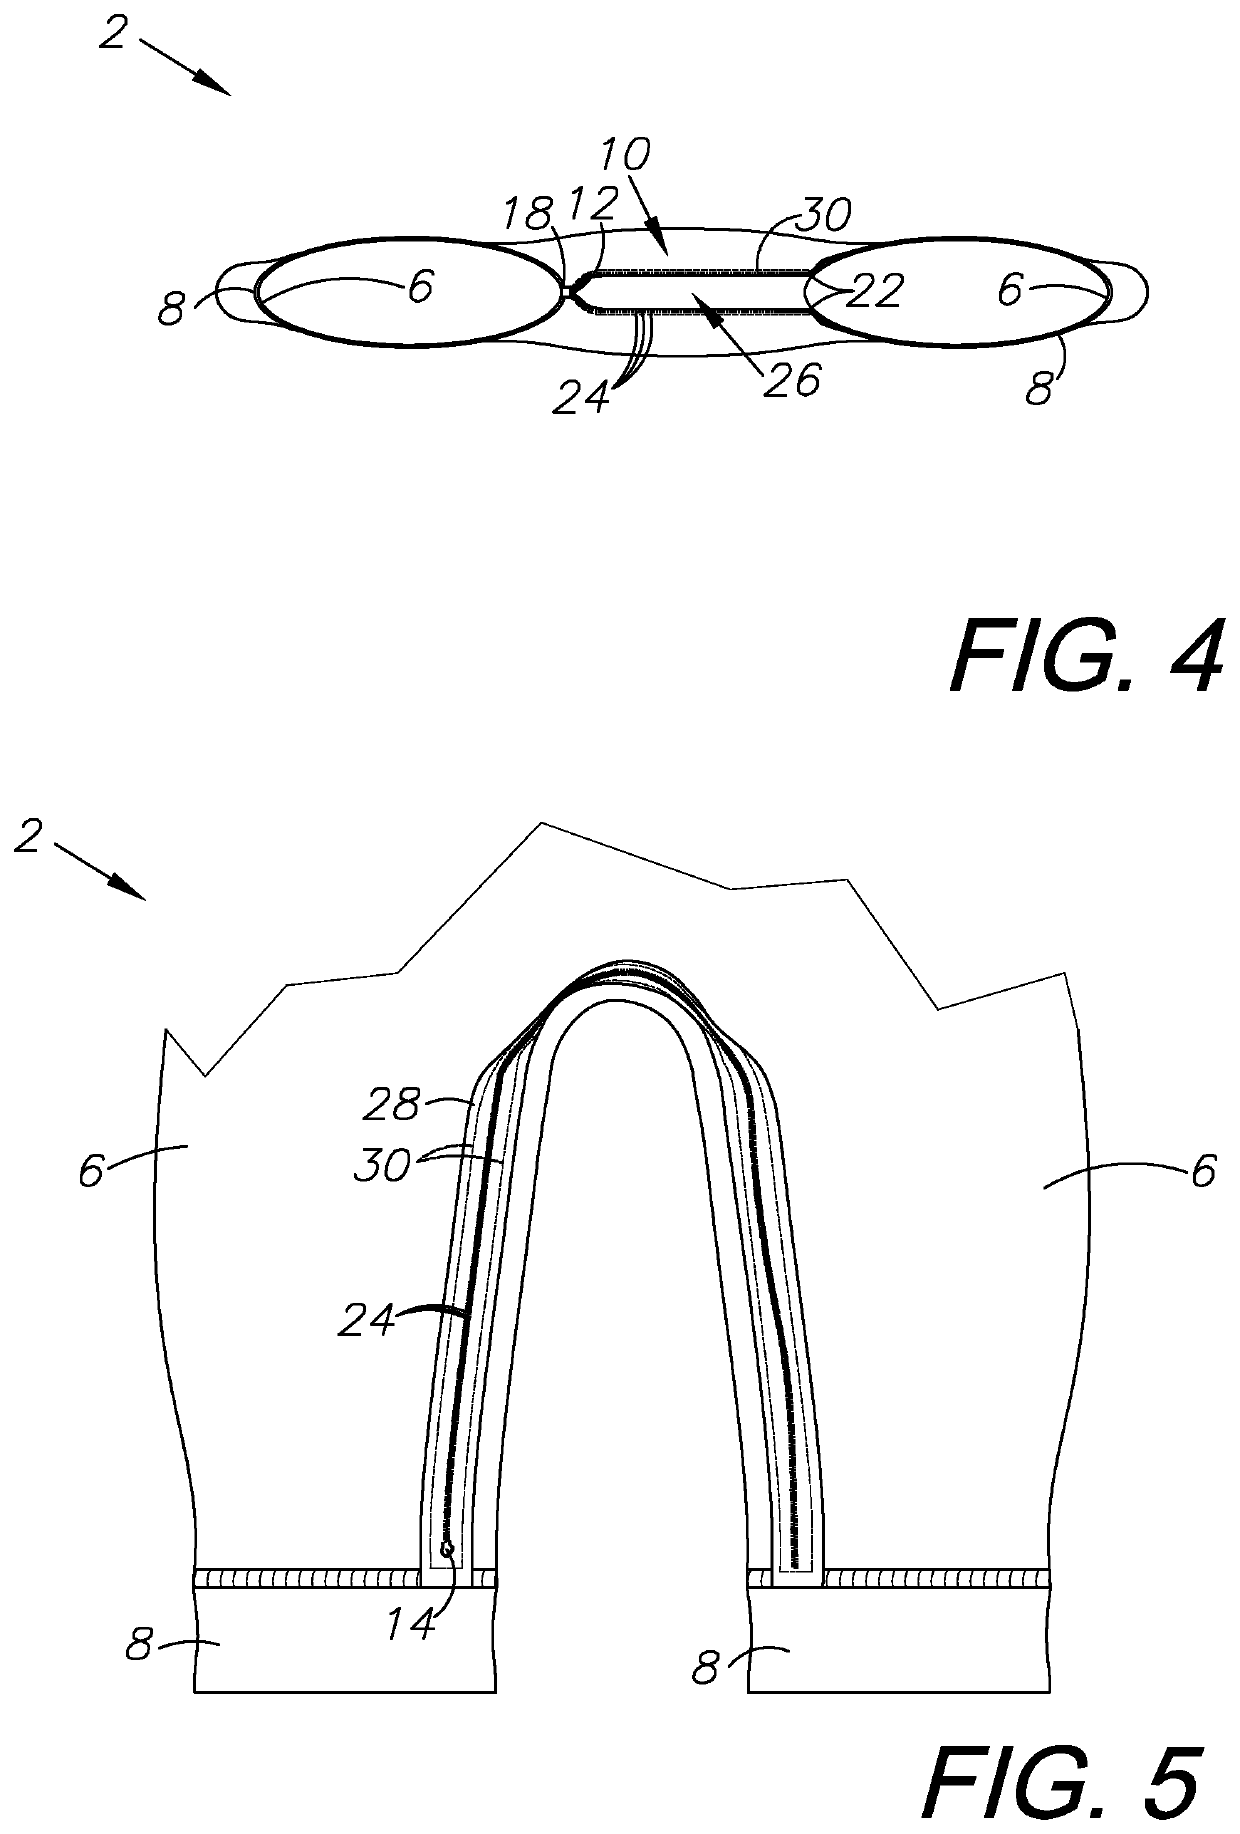 Child clothing device with reinforced zipper access, method of use, and method of manufacture